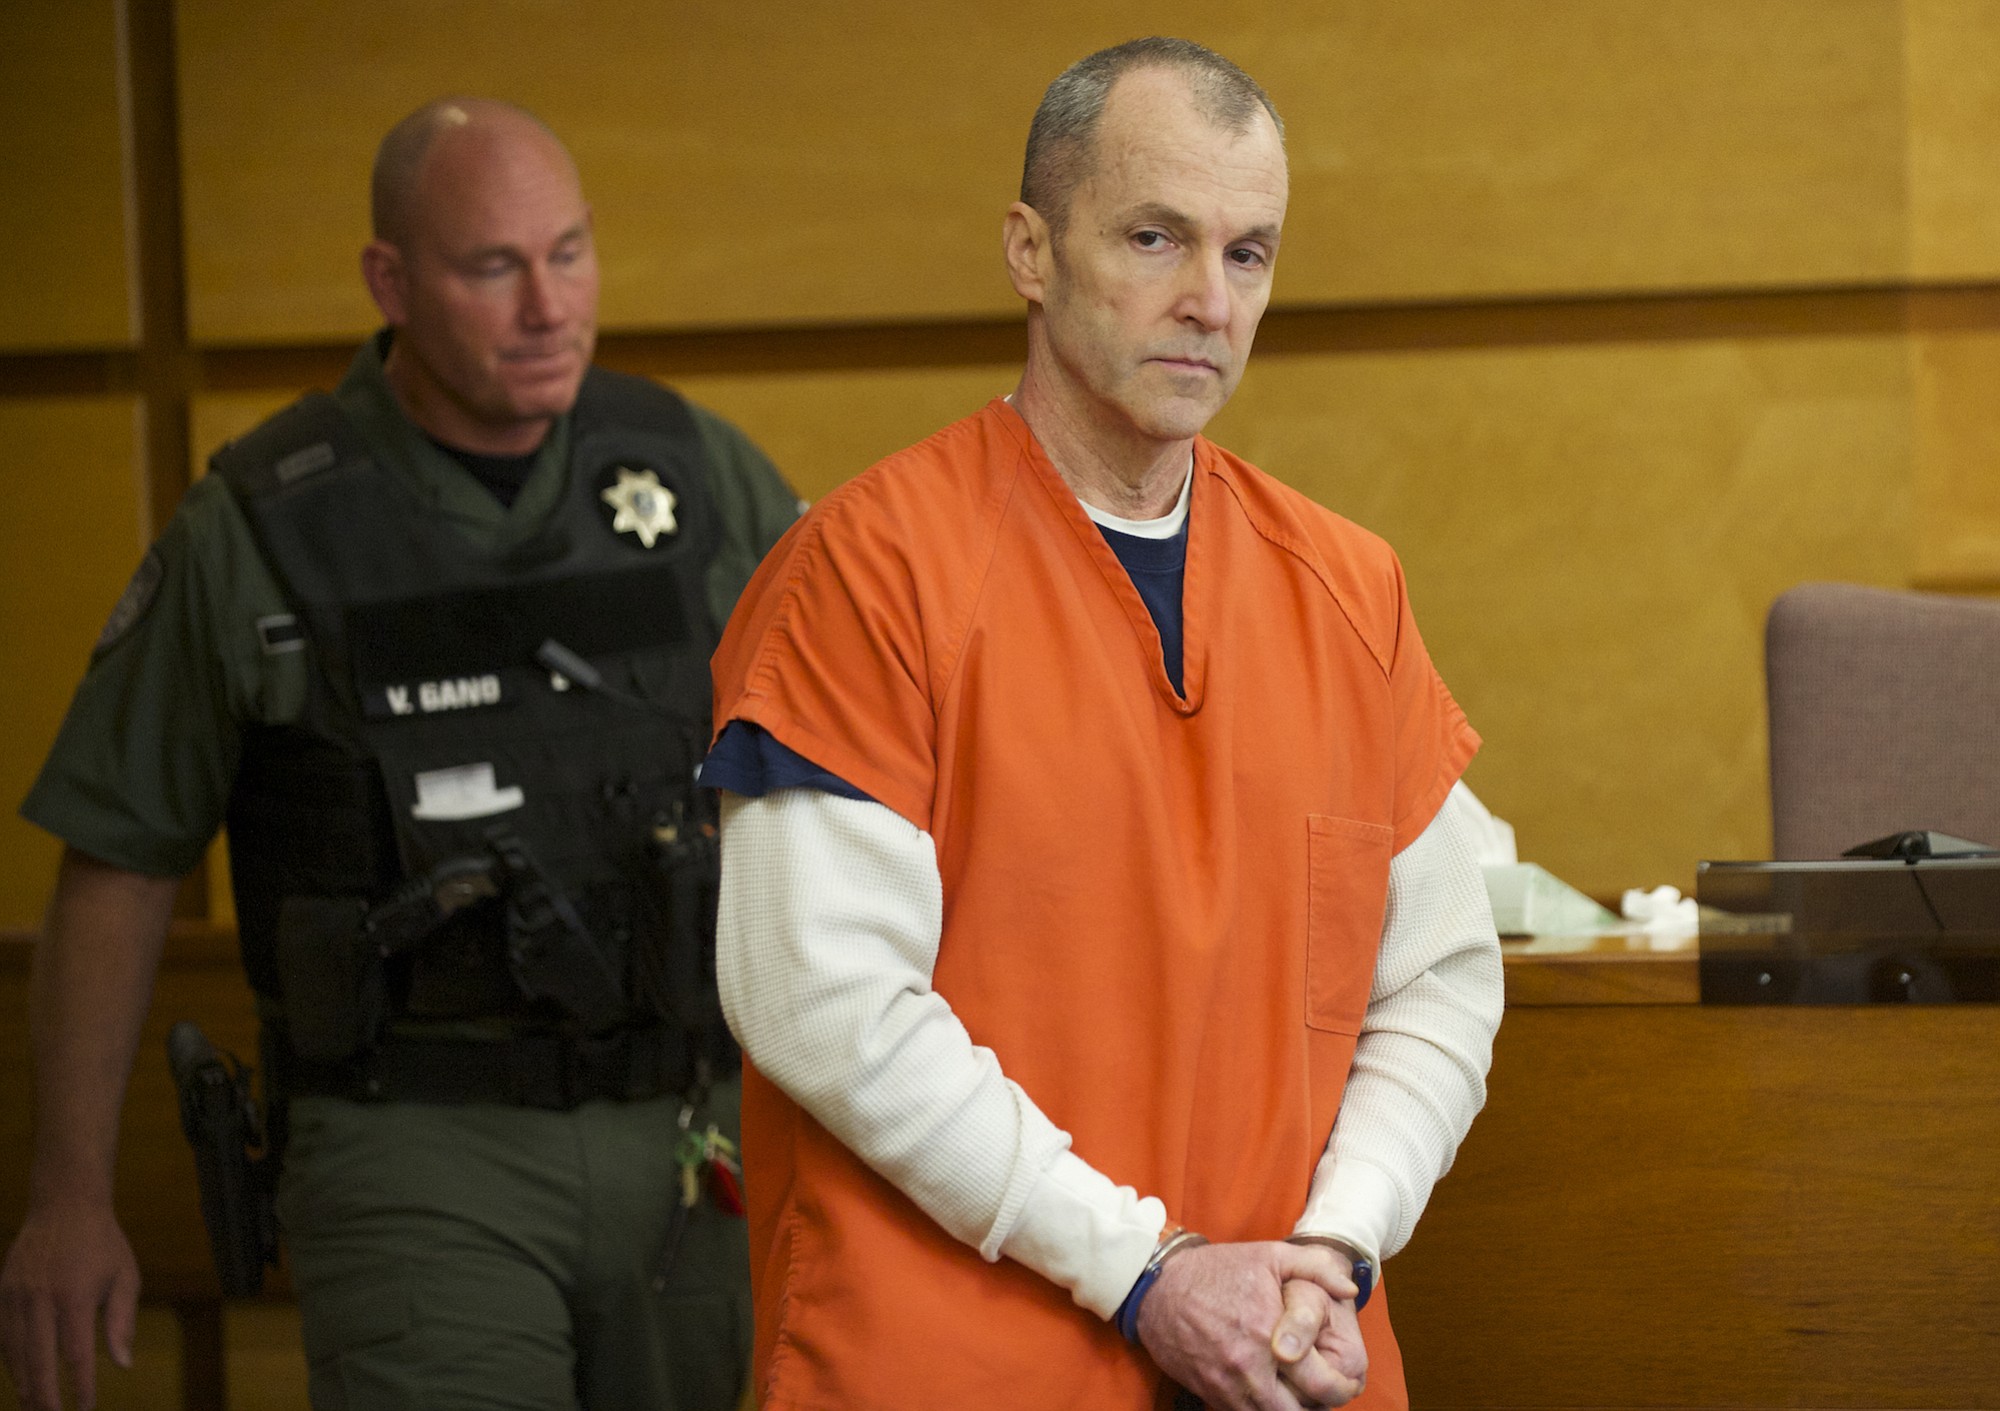 Kenneth Garrison, an ex-Lieutenant with Washington State Patrol who pleaded guilty to sexual abuse of two relatives, was sentenced to a minimum of just under 11 years in prison Friday.